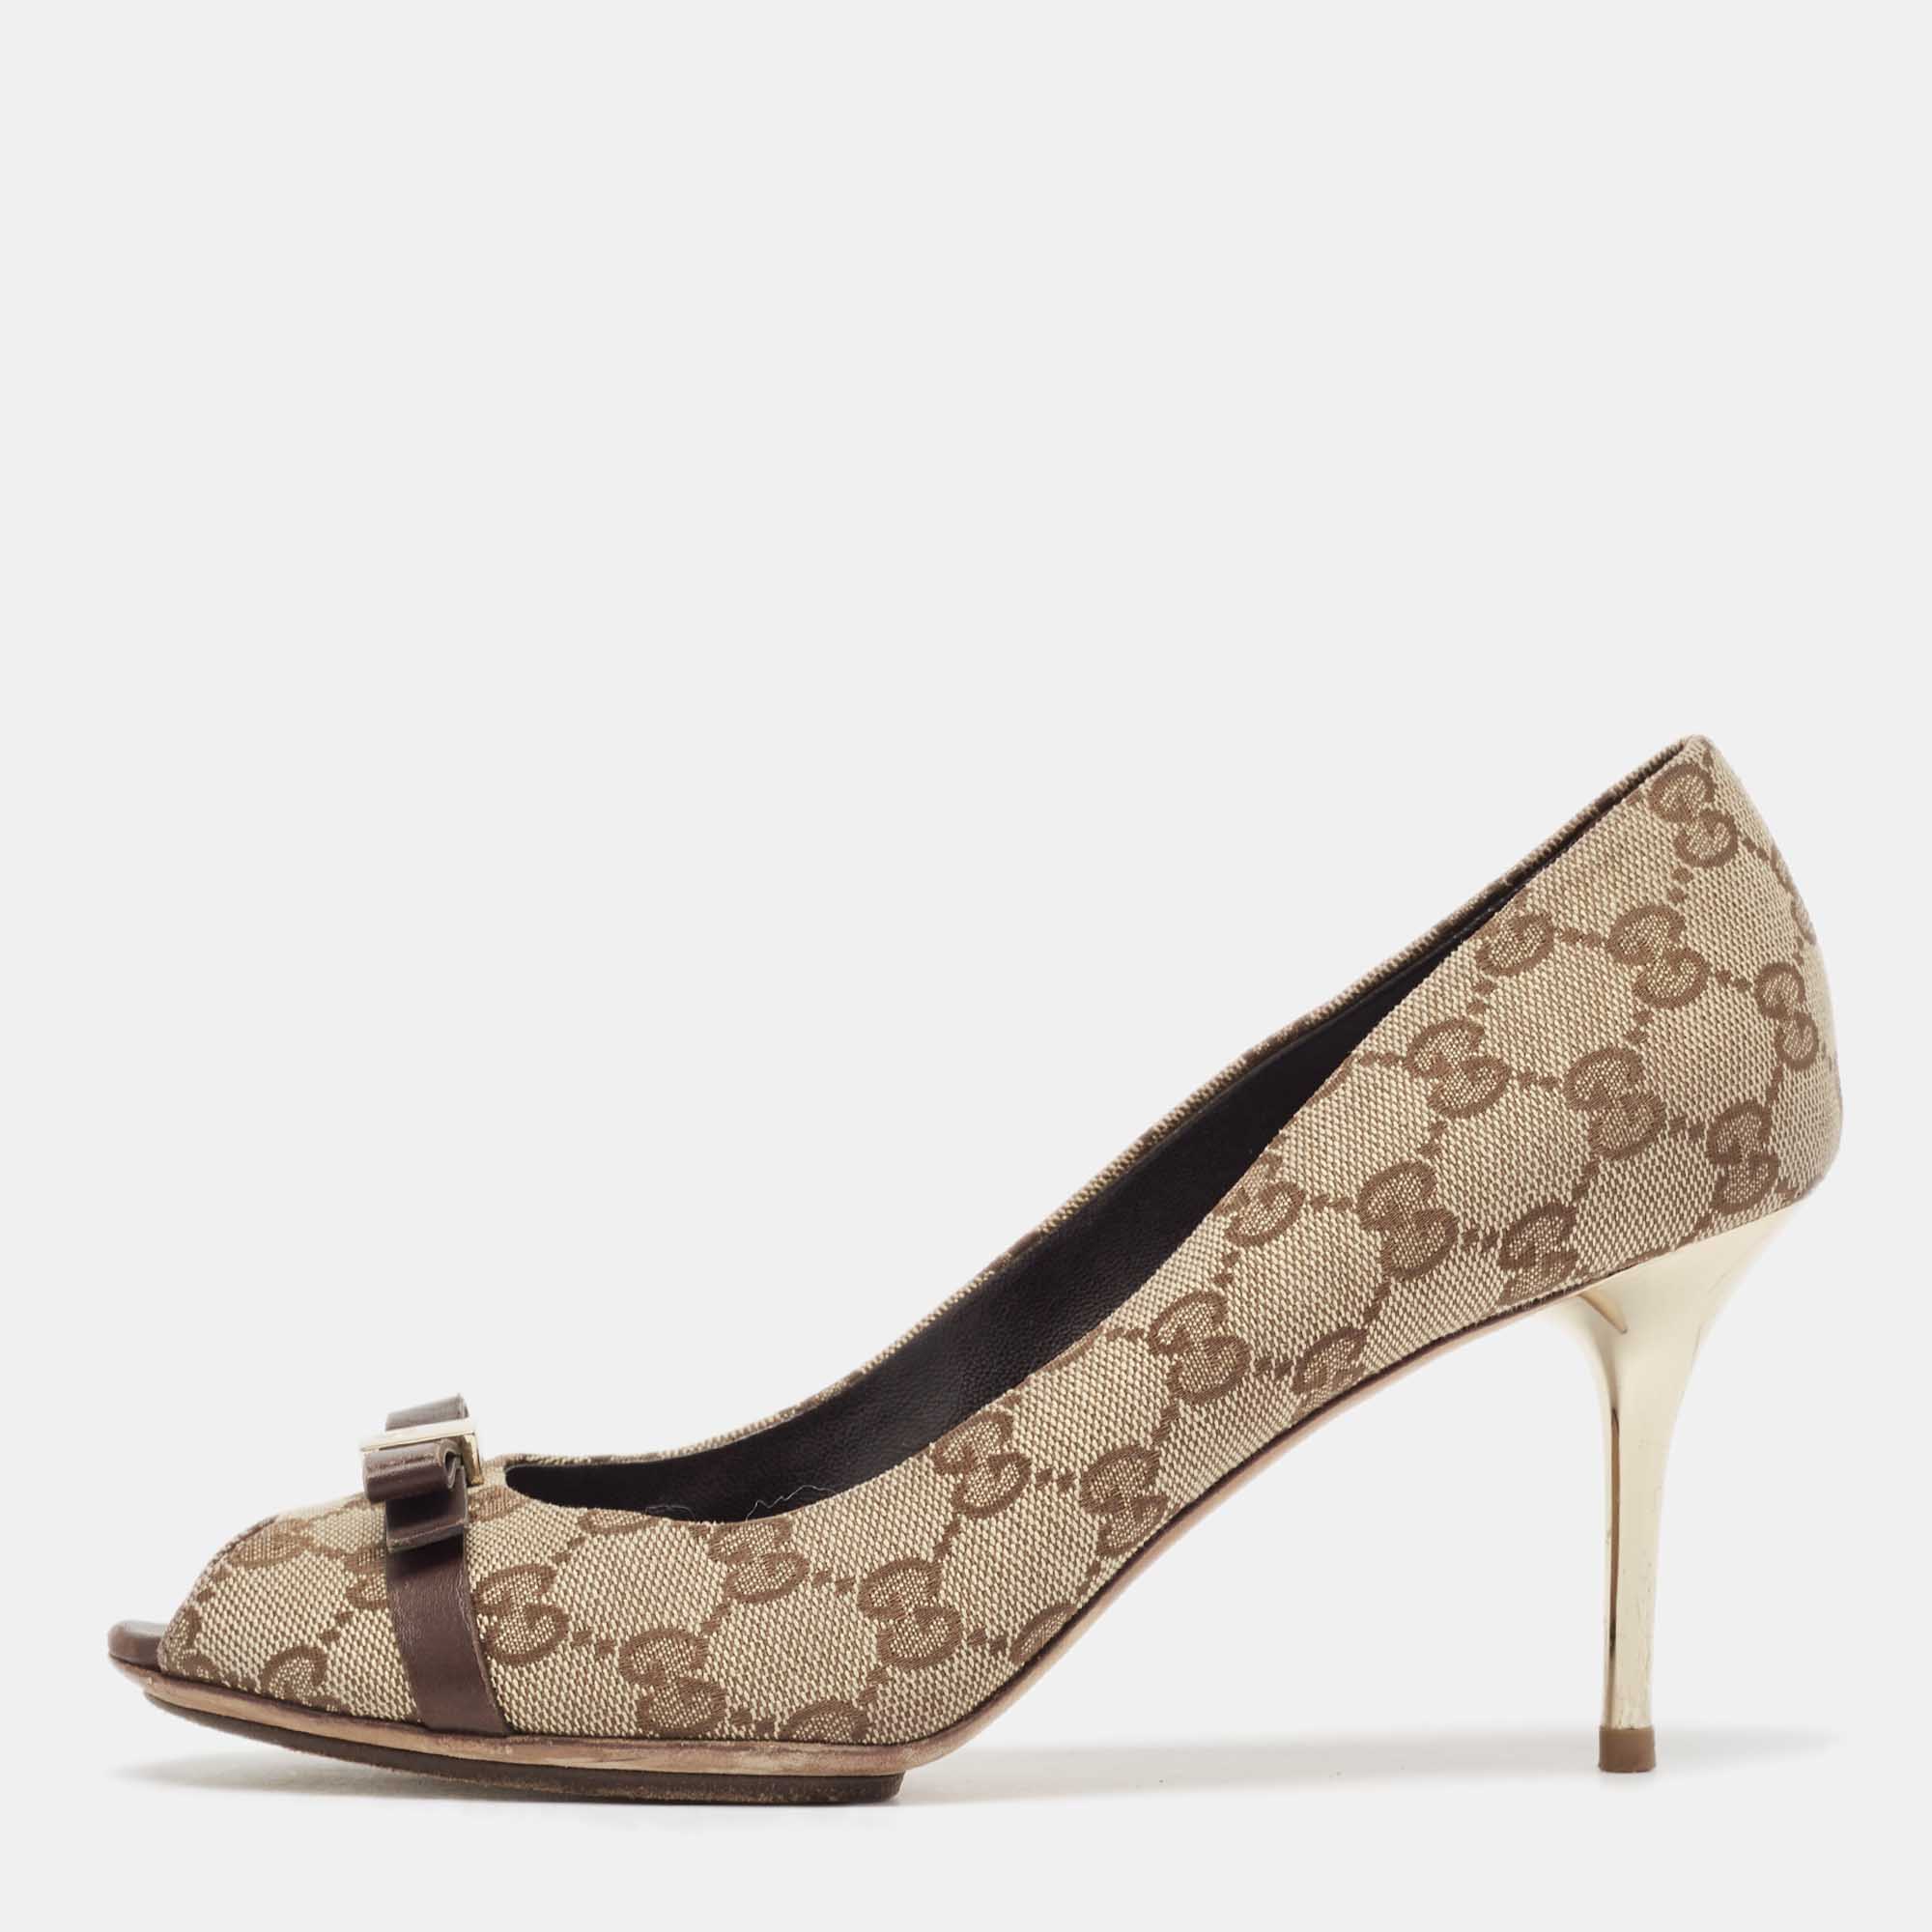 Gucci beige/brown canvas and leather  peep toe pumps size 39